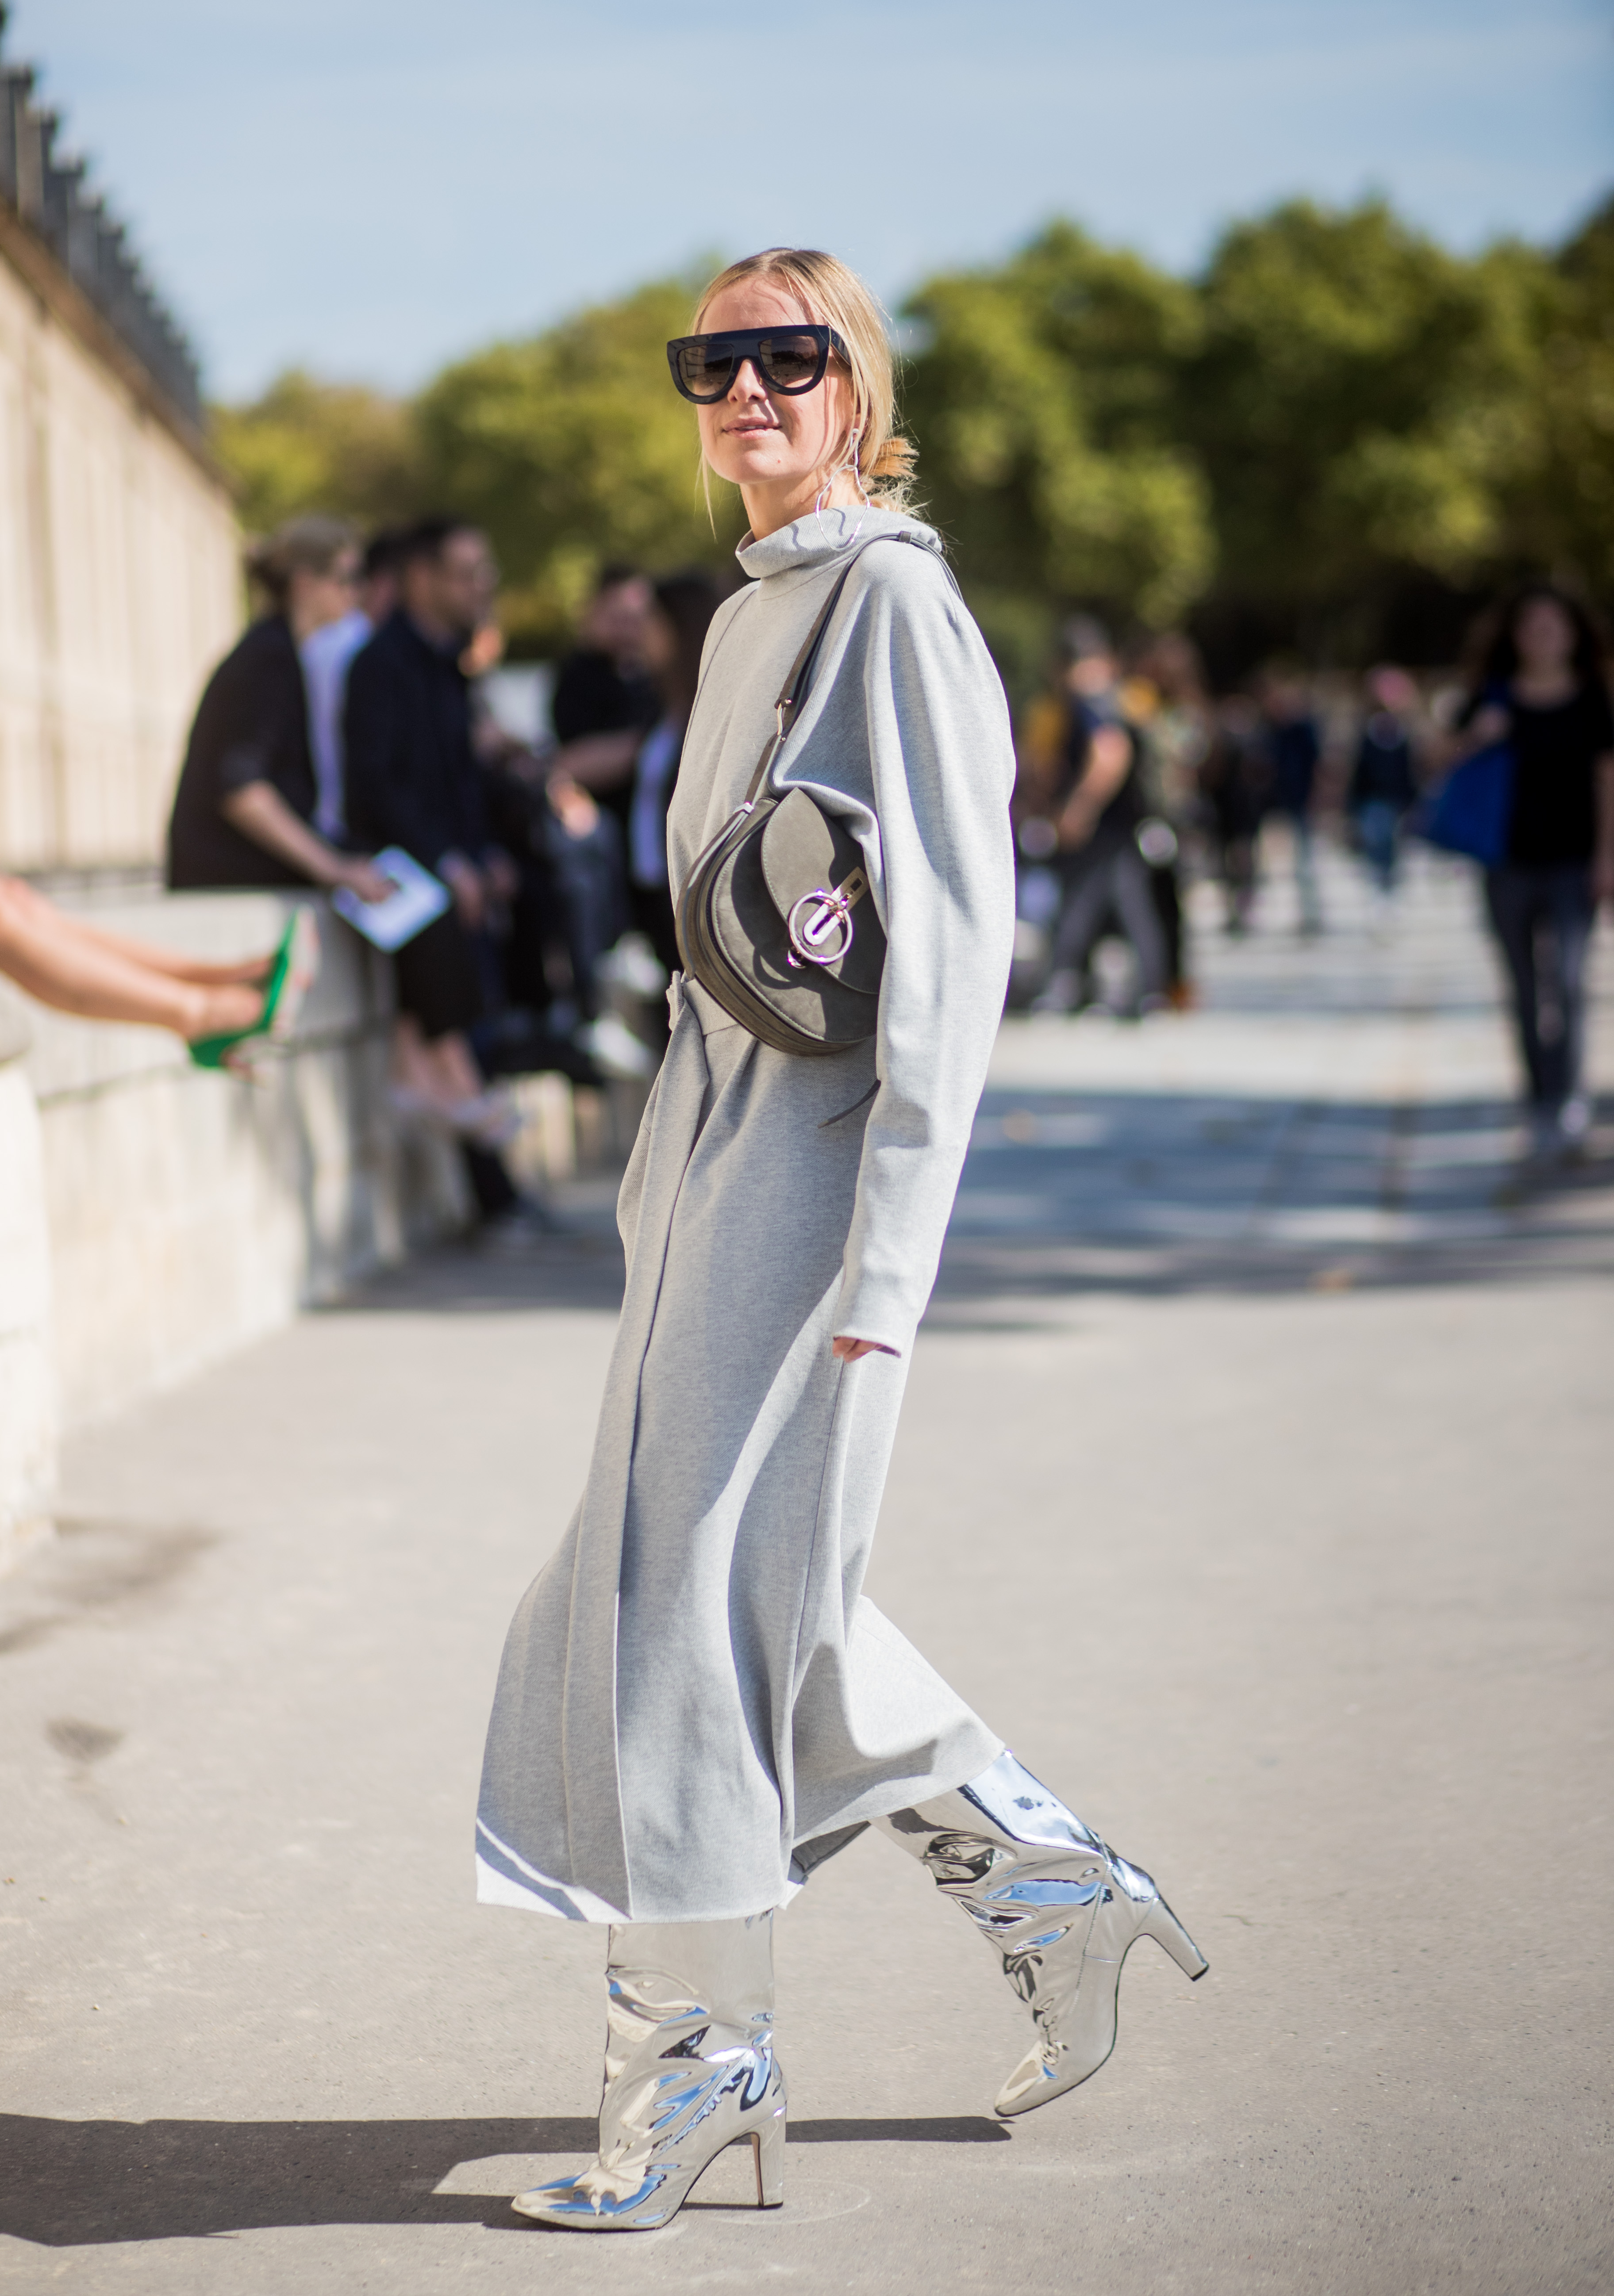 PARIS, FRANCE - SEPTEMBER 29: Celine Aagaard wearing silver boots, grey dress is seen outside Nina Ricci during Paris Fashion Week Spring/Summer 2018 on September 29, 2017 in Paris, France. (Photo by Christian Vierig/Getty Images)